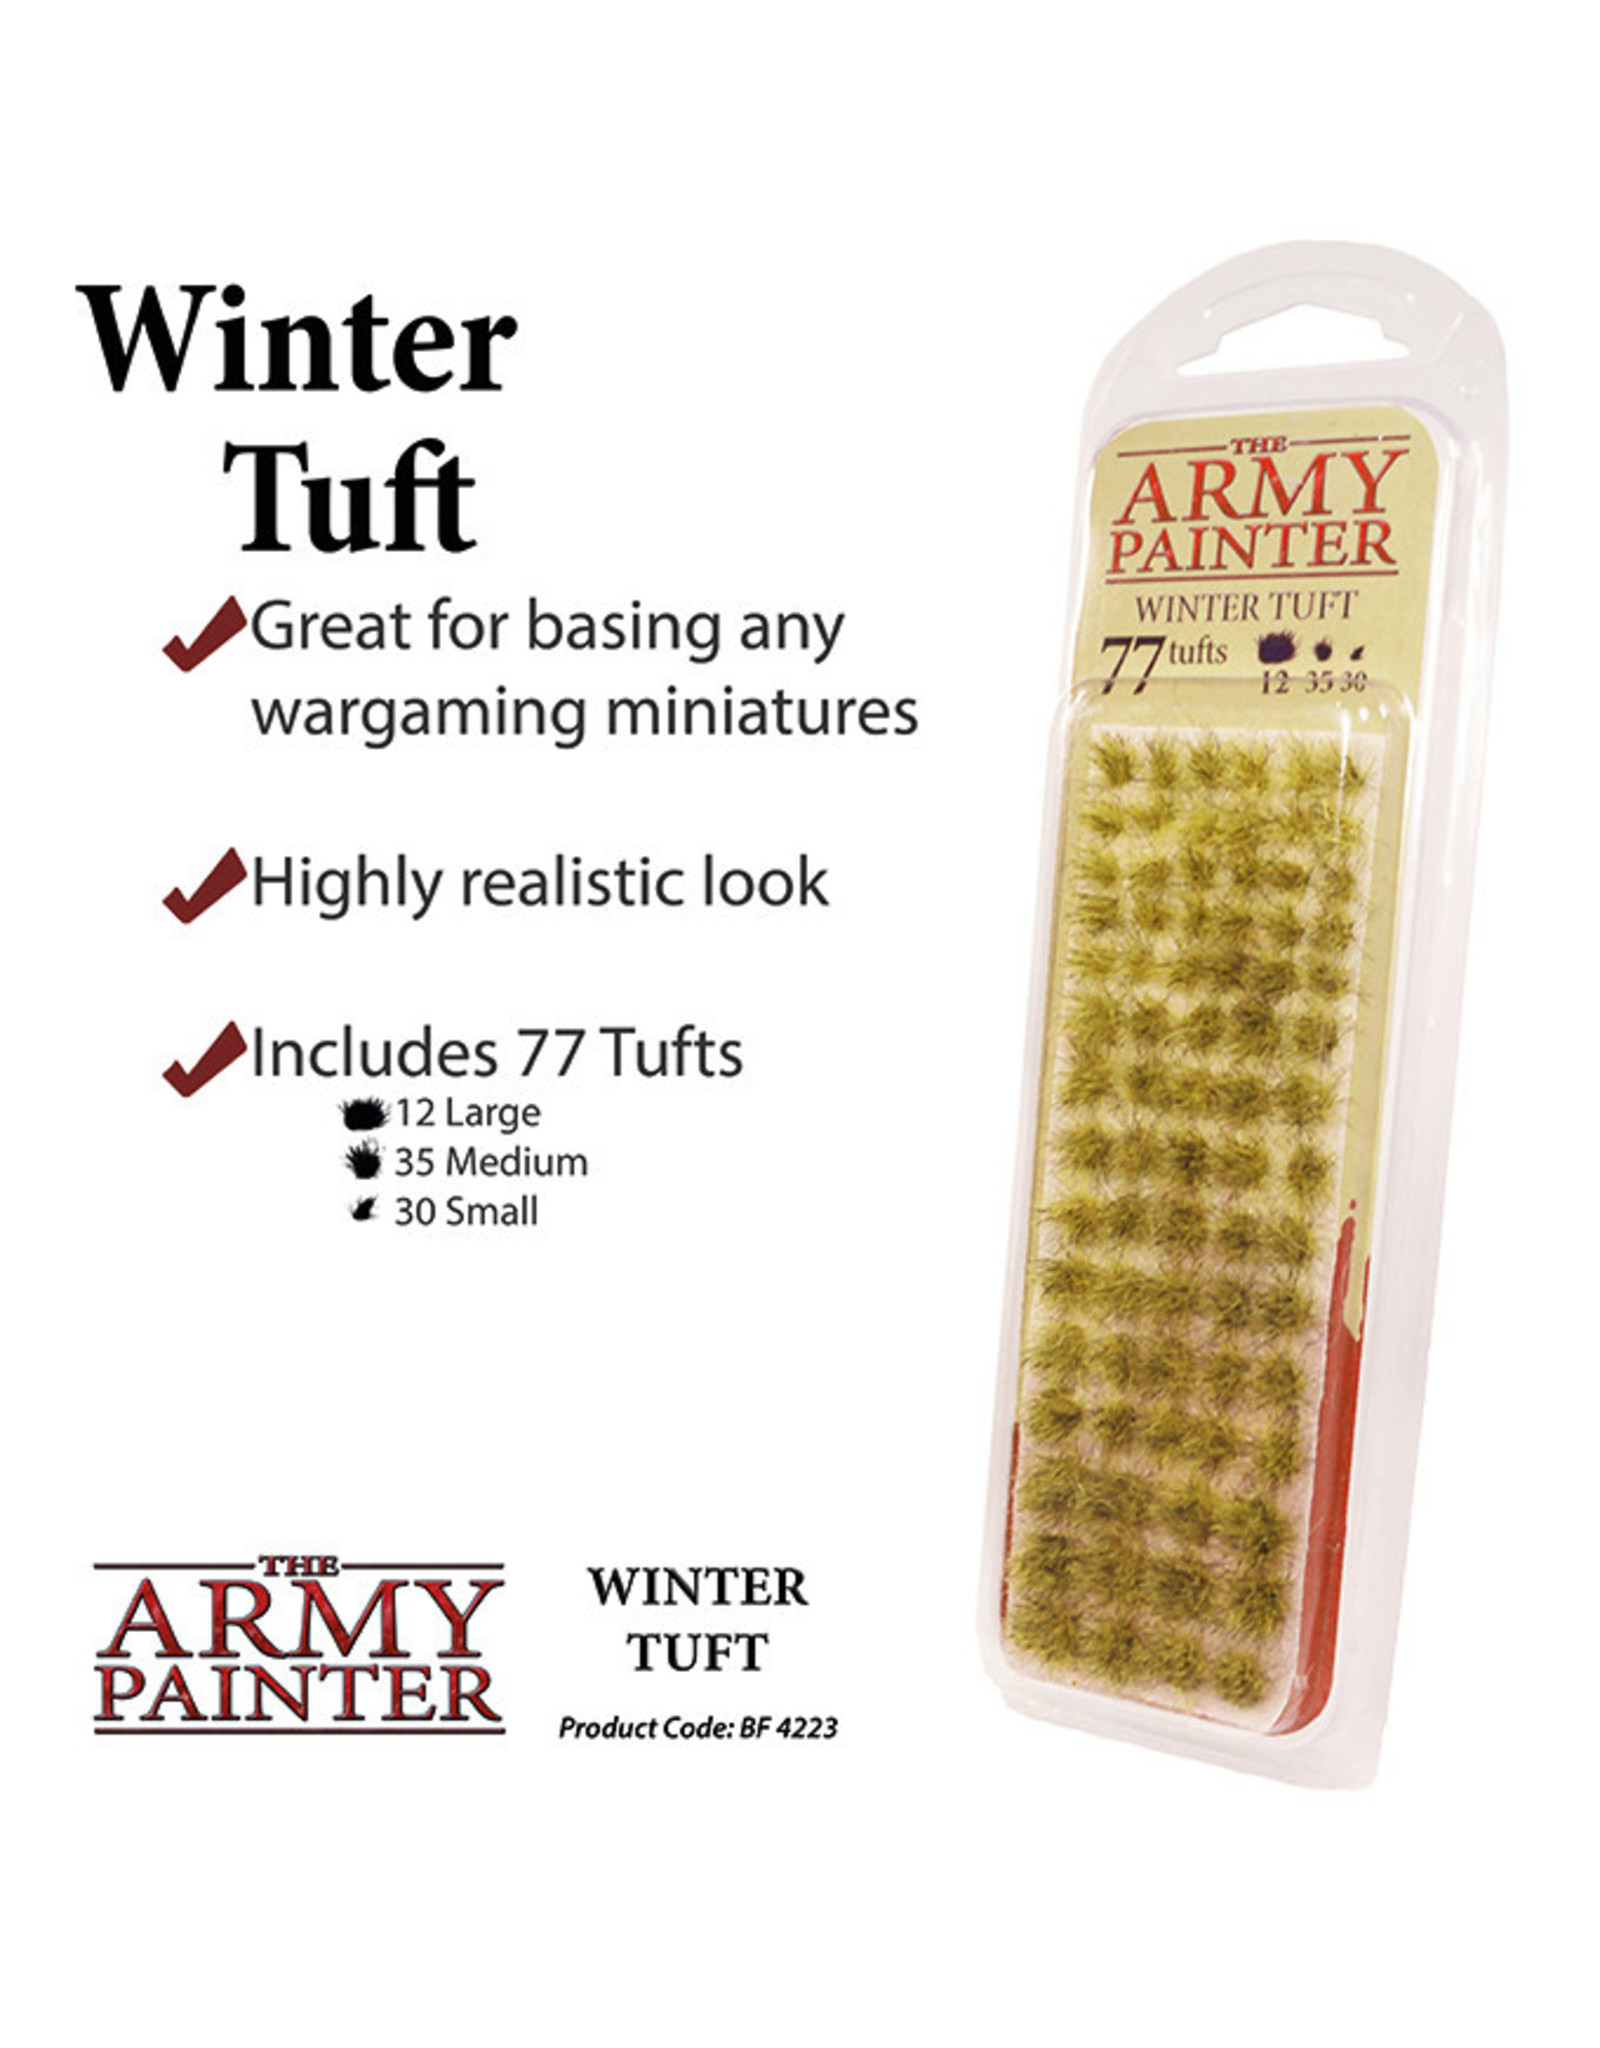 The Army Painter BF4223 Winter Tuft